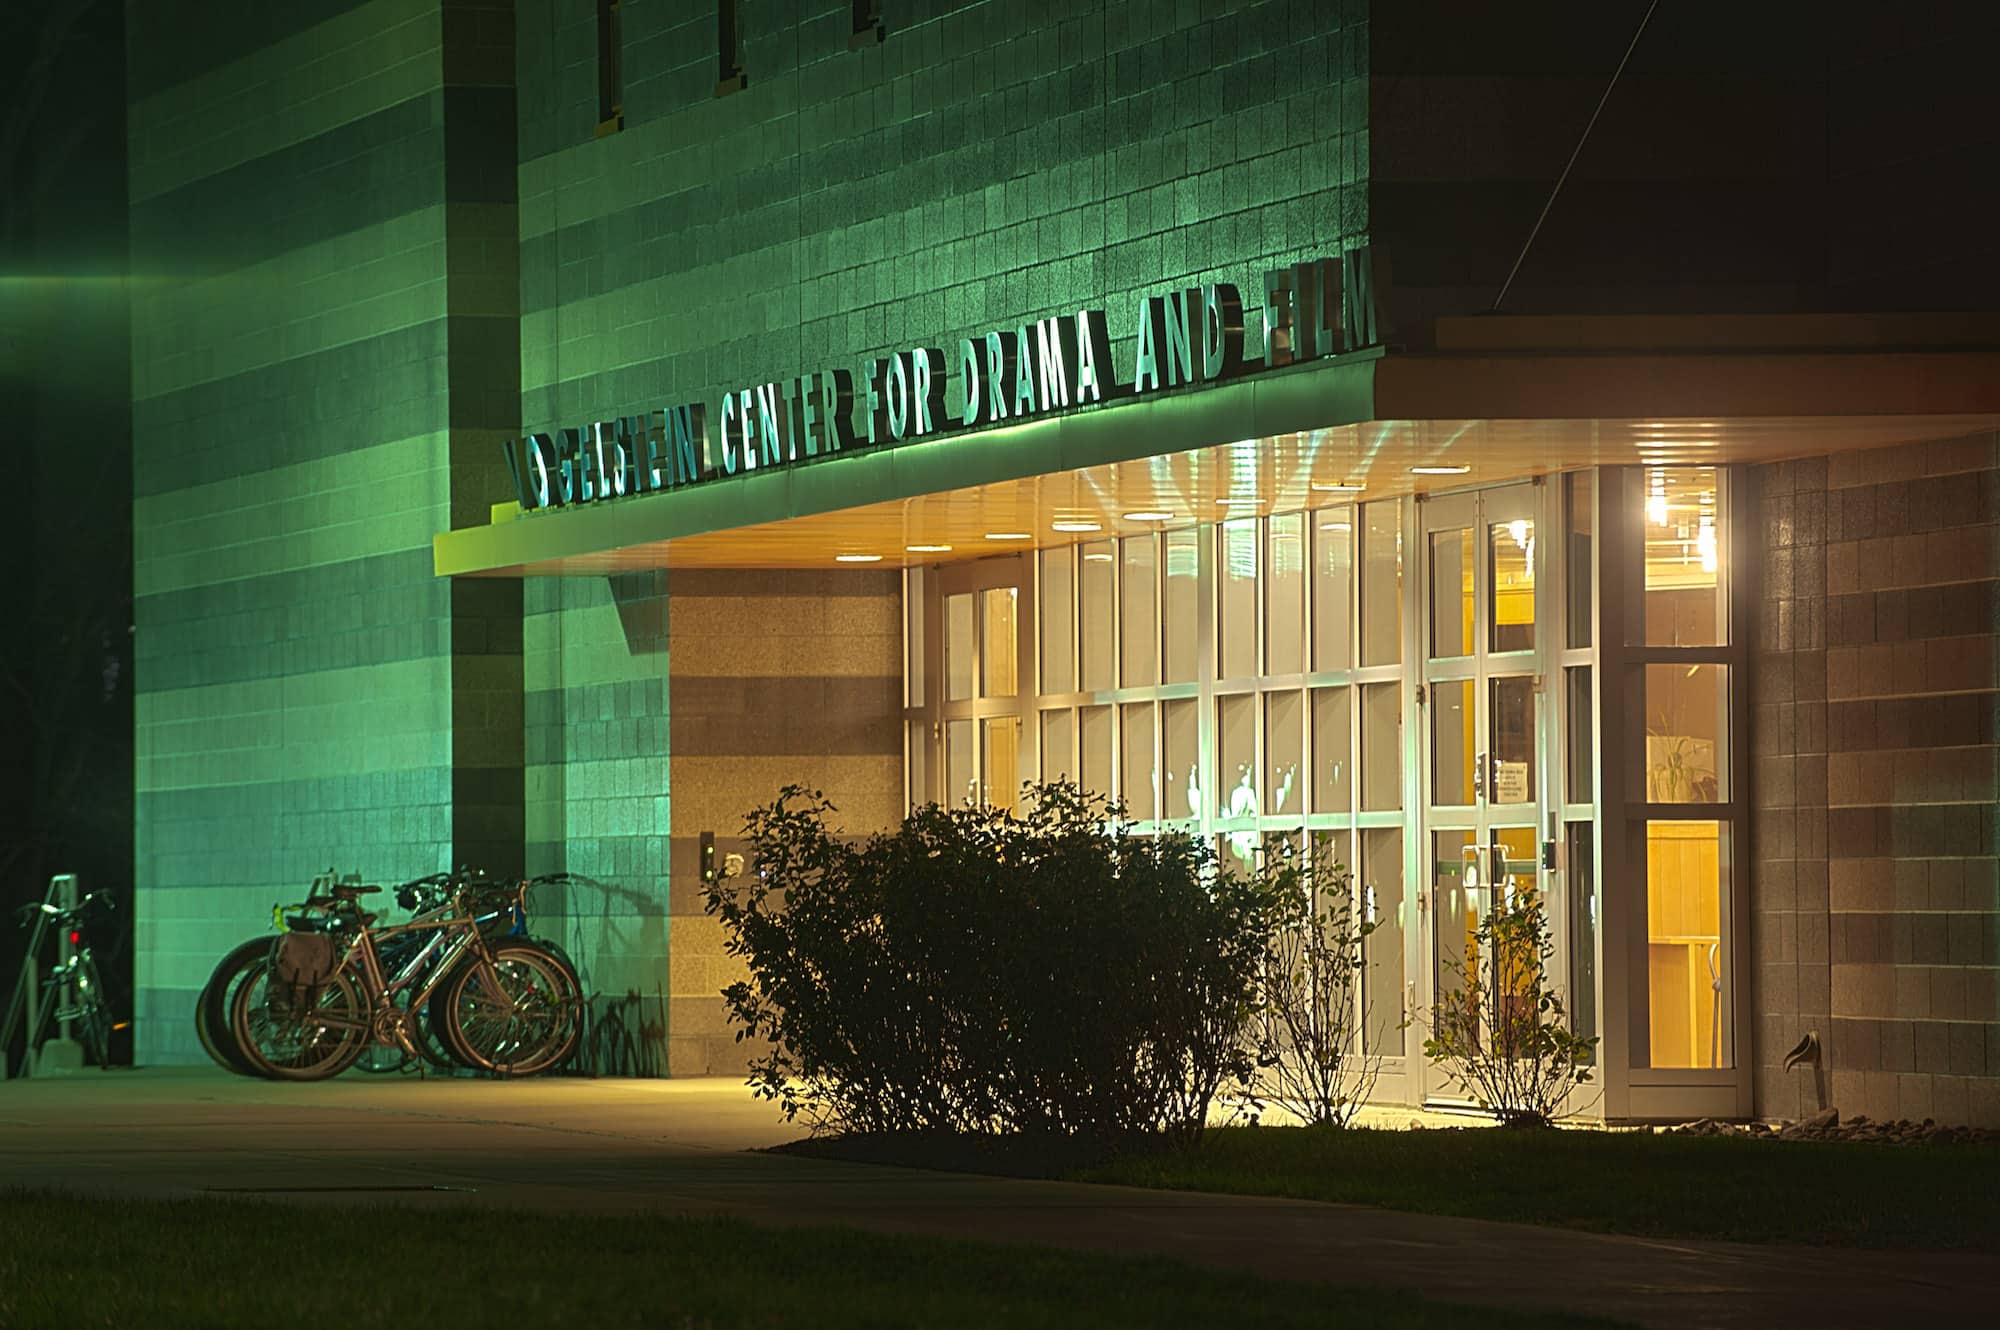 A nighttime view of the glass-walled entrance to a large stone and brick building, with the name of the building above the entrance, the Vogelstein Center for Drama and Film.